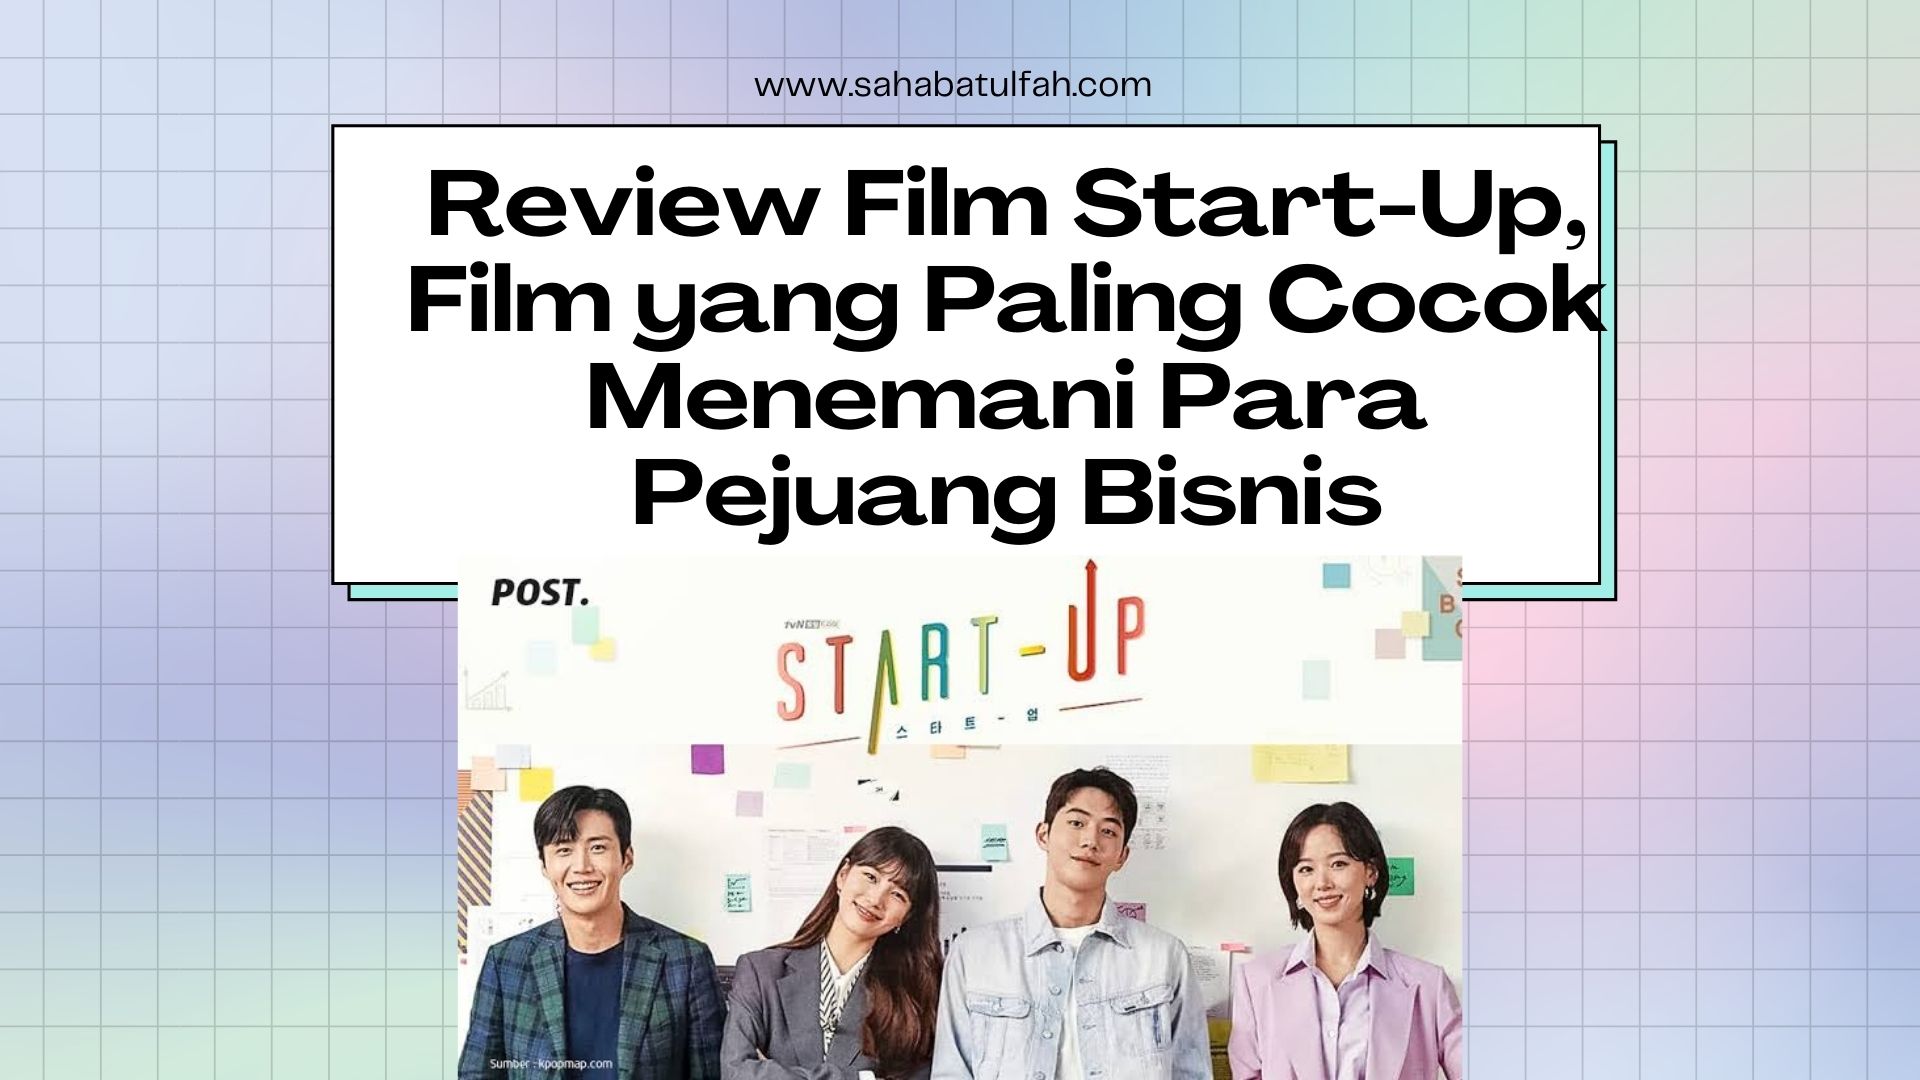 Review-Film-Start-Up